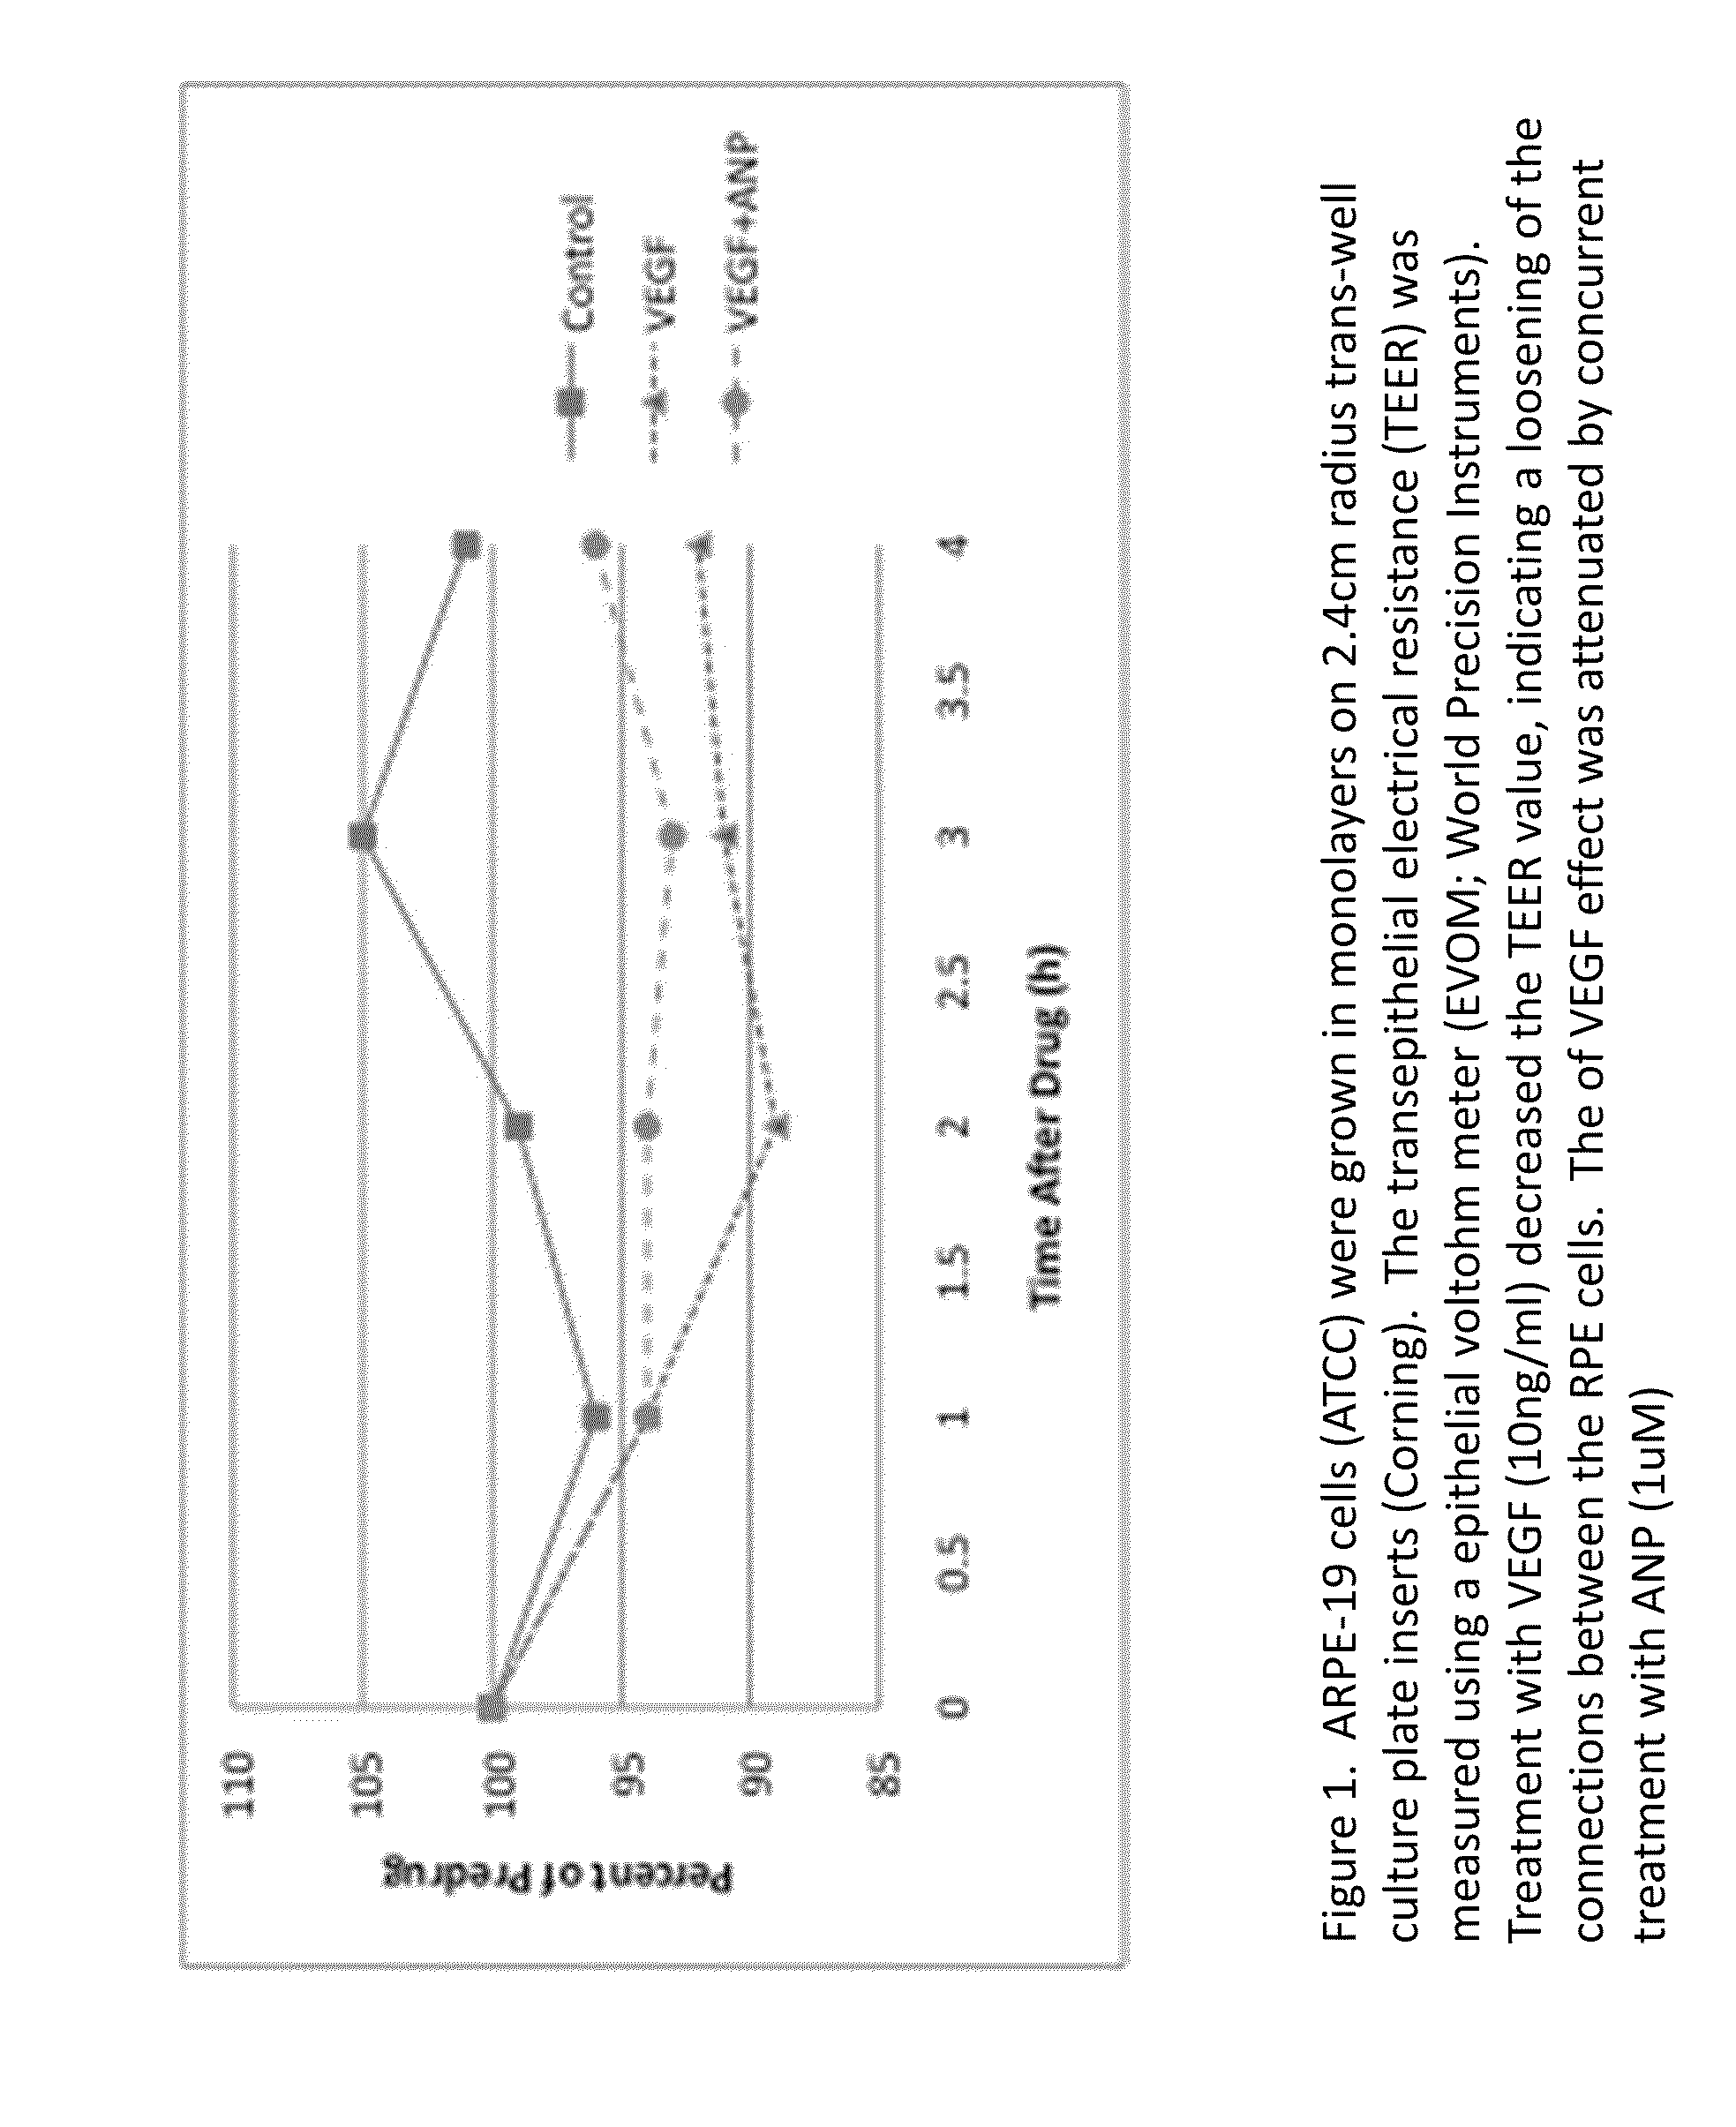 Methods and uses of anp (atrial natriuretic peptide), bnp (brain natriuretic peptide) and cnp (c-type natriuretic peptide)-related peptides and derivatives thereof for treatment of retinal disorders and diseases